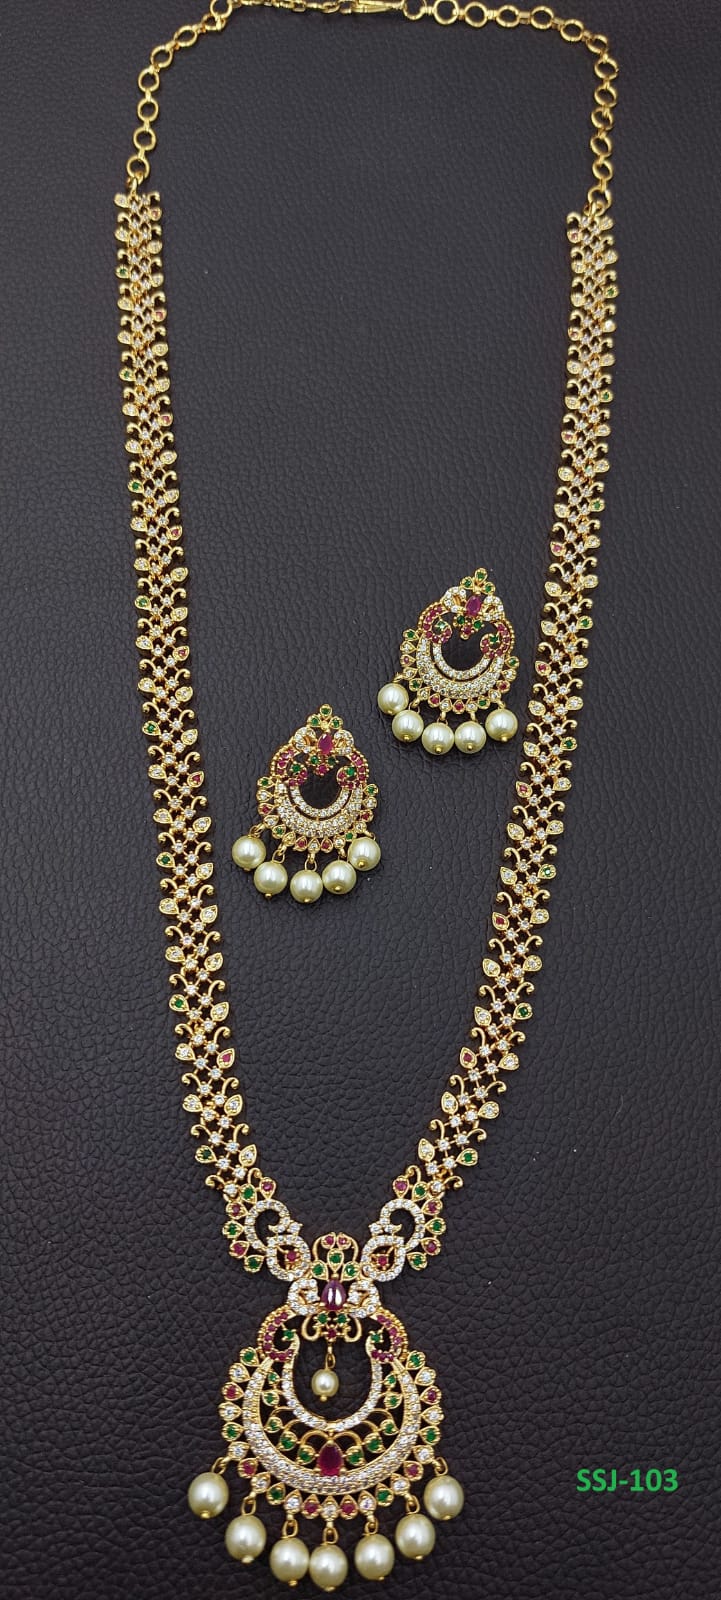 Classic American Diamond Stone Jewelry Haram Long Necklace Set with Chandbali Earrings- Multicolor2